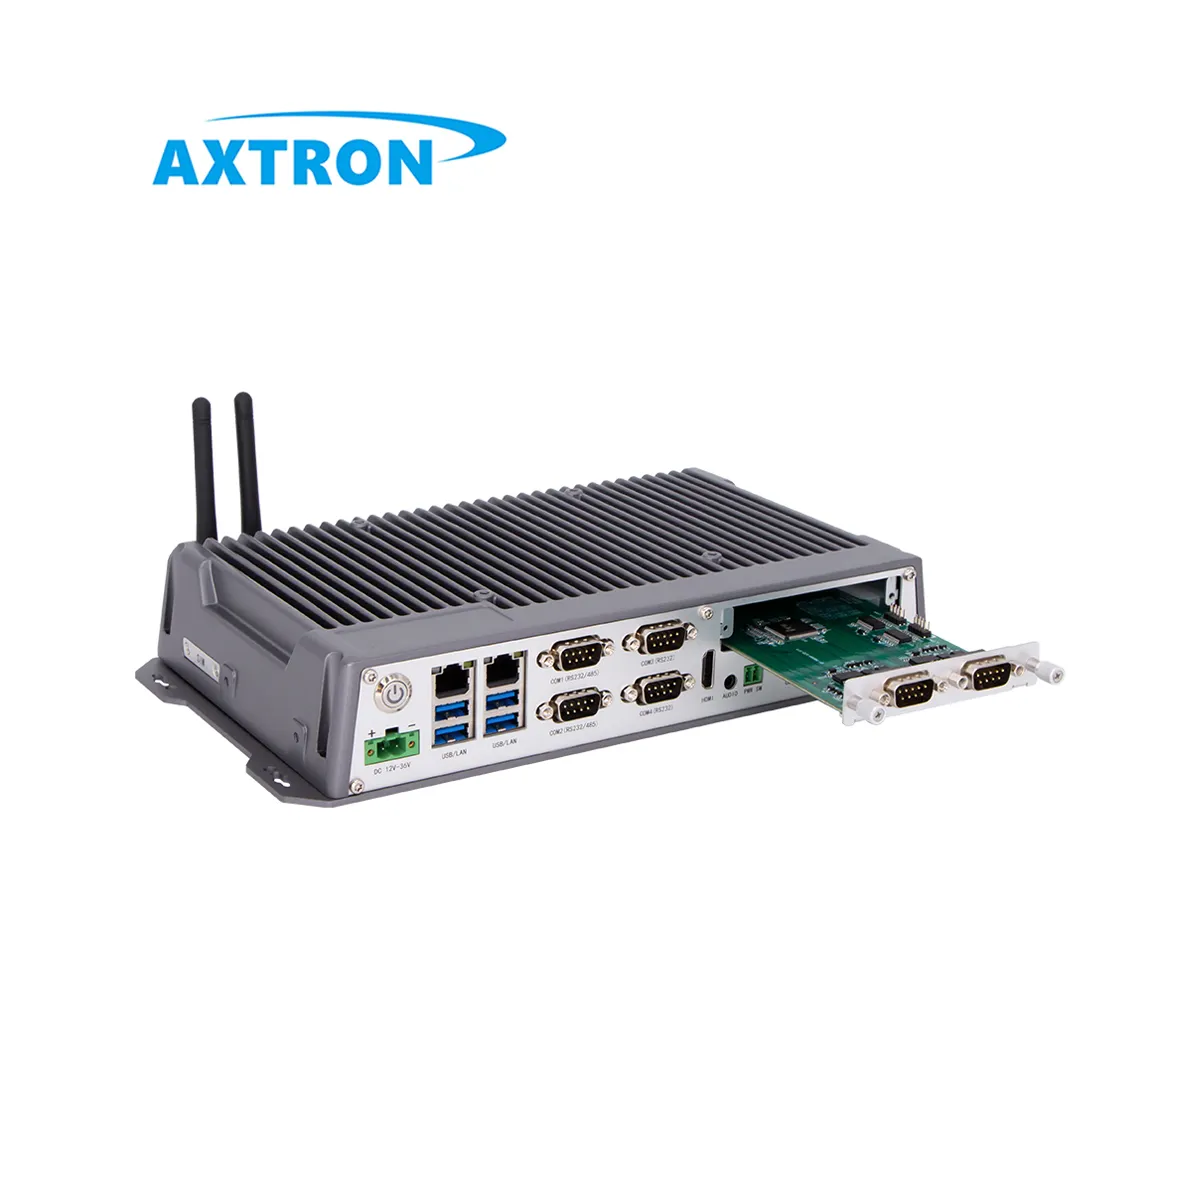 2 Lan 4 USB 6 COM RS232 RS485 Linux Window Dual Lan Compact Embedded Rich IO Industrial Industrial I3 I5 I7 Mini Pc